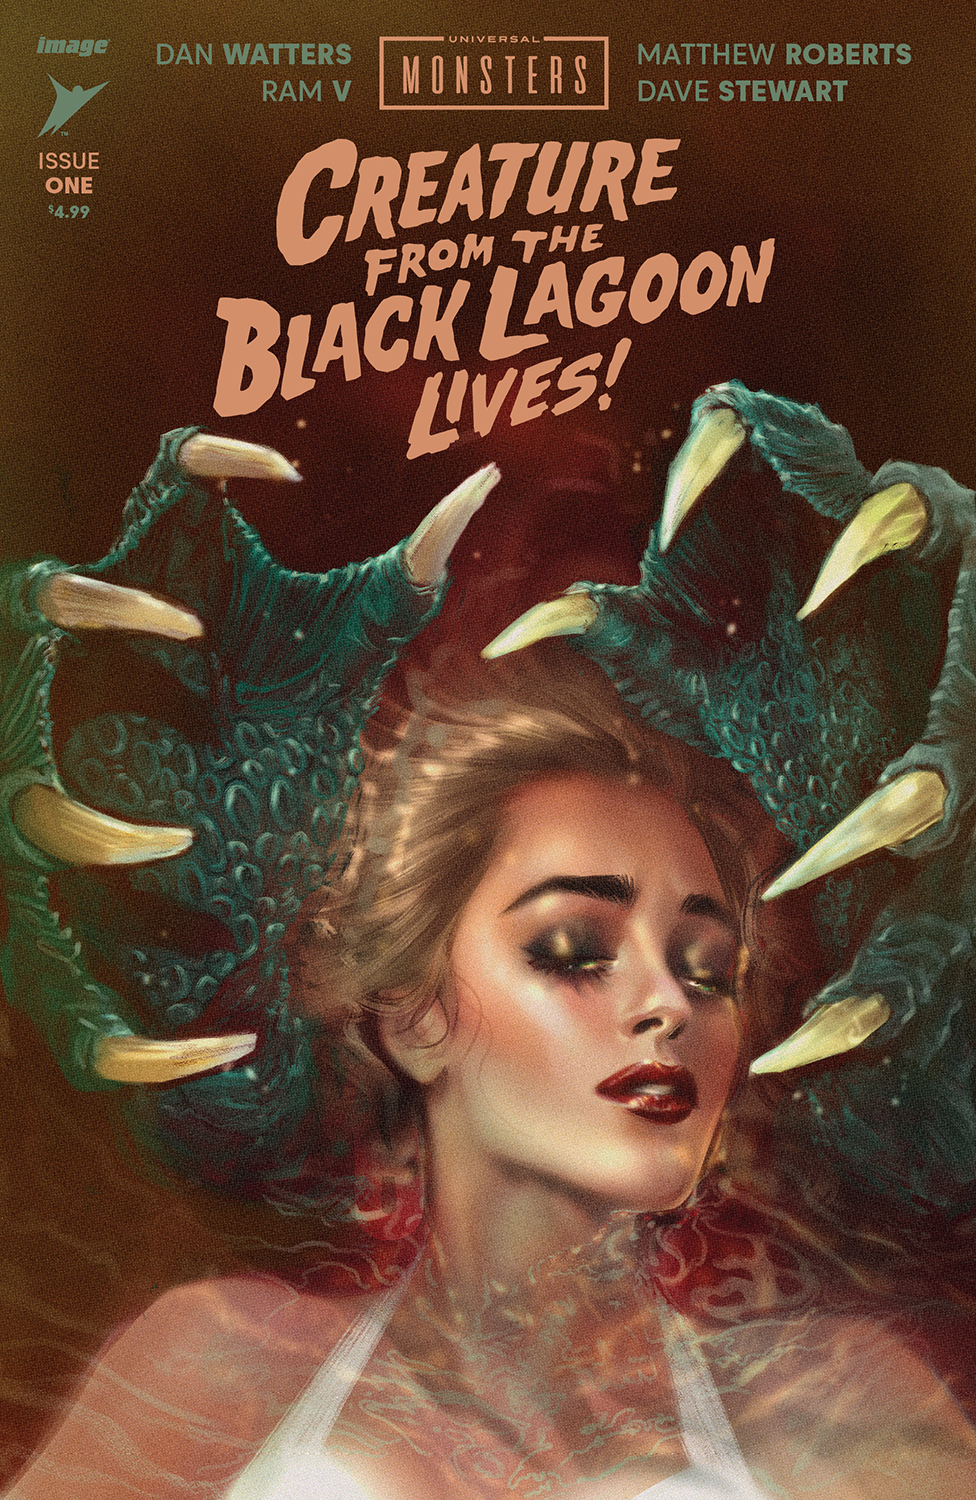 Universal Monsters the Creature from the Black Lagoon Lives #1 Cover E 1 for 50 Incentive Joelle Jones (Of 4)